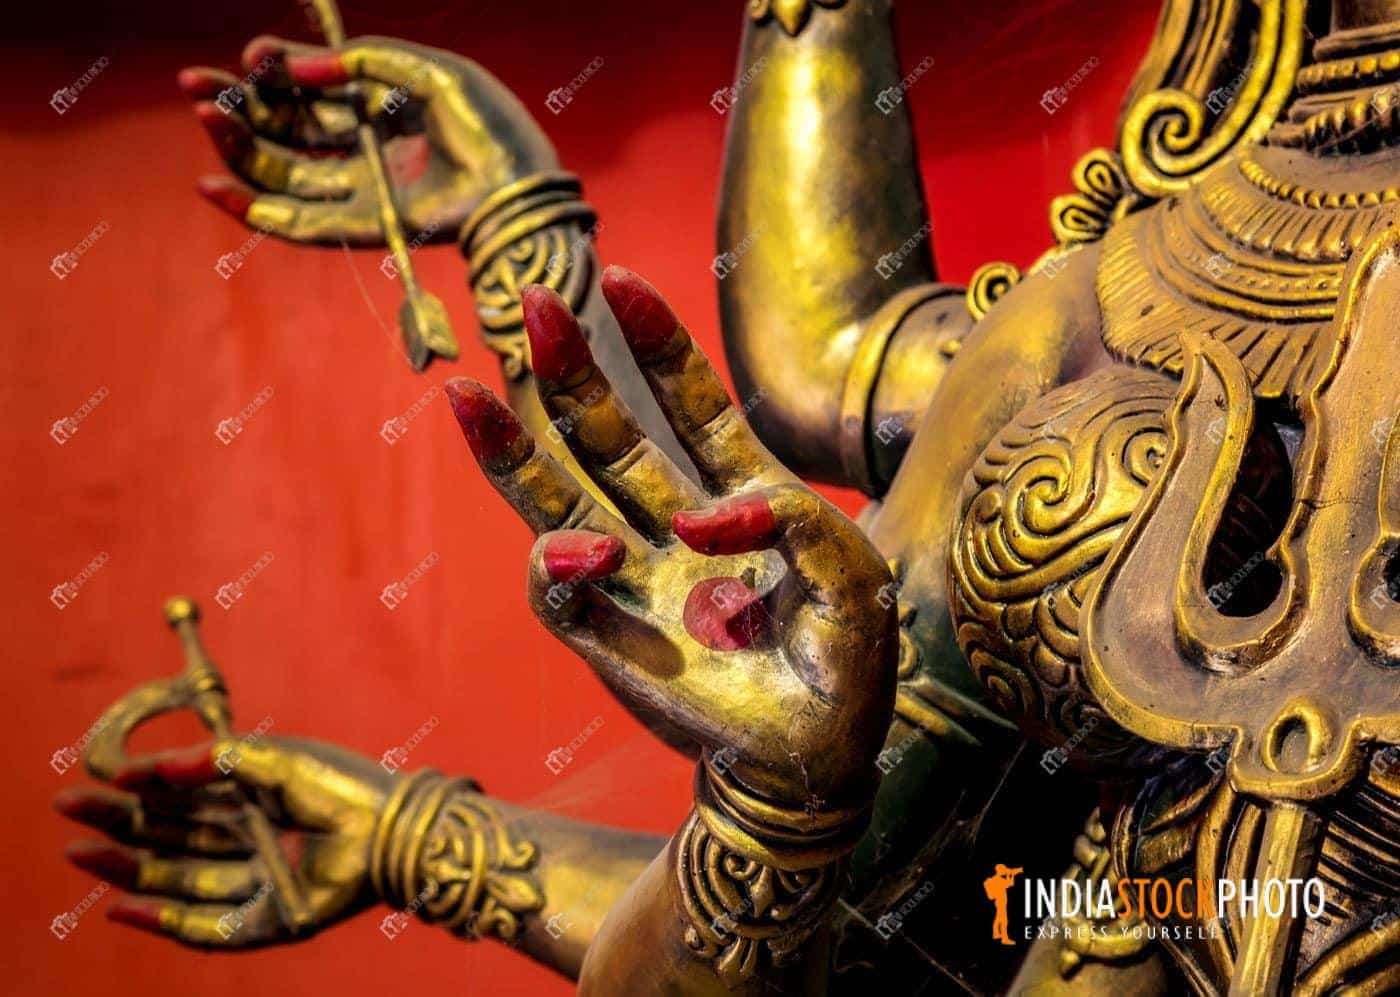 Goddess Durga blessings hand in close up view